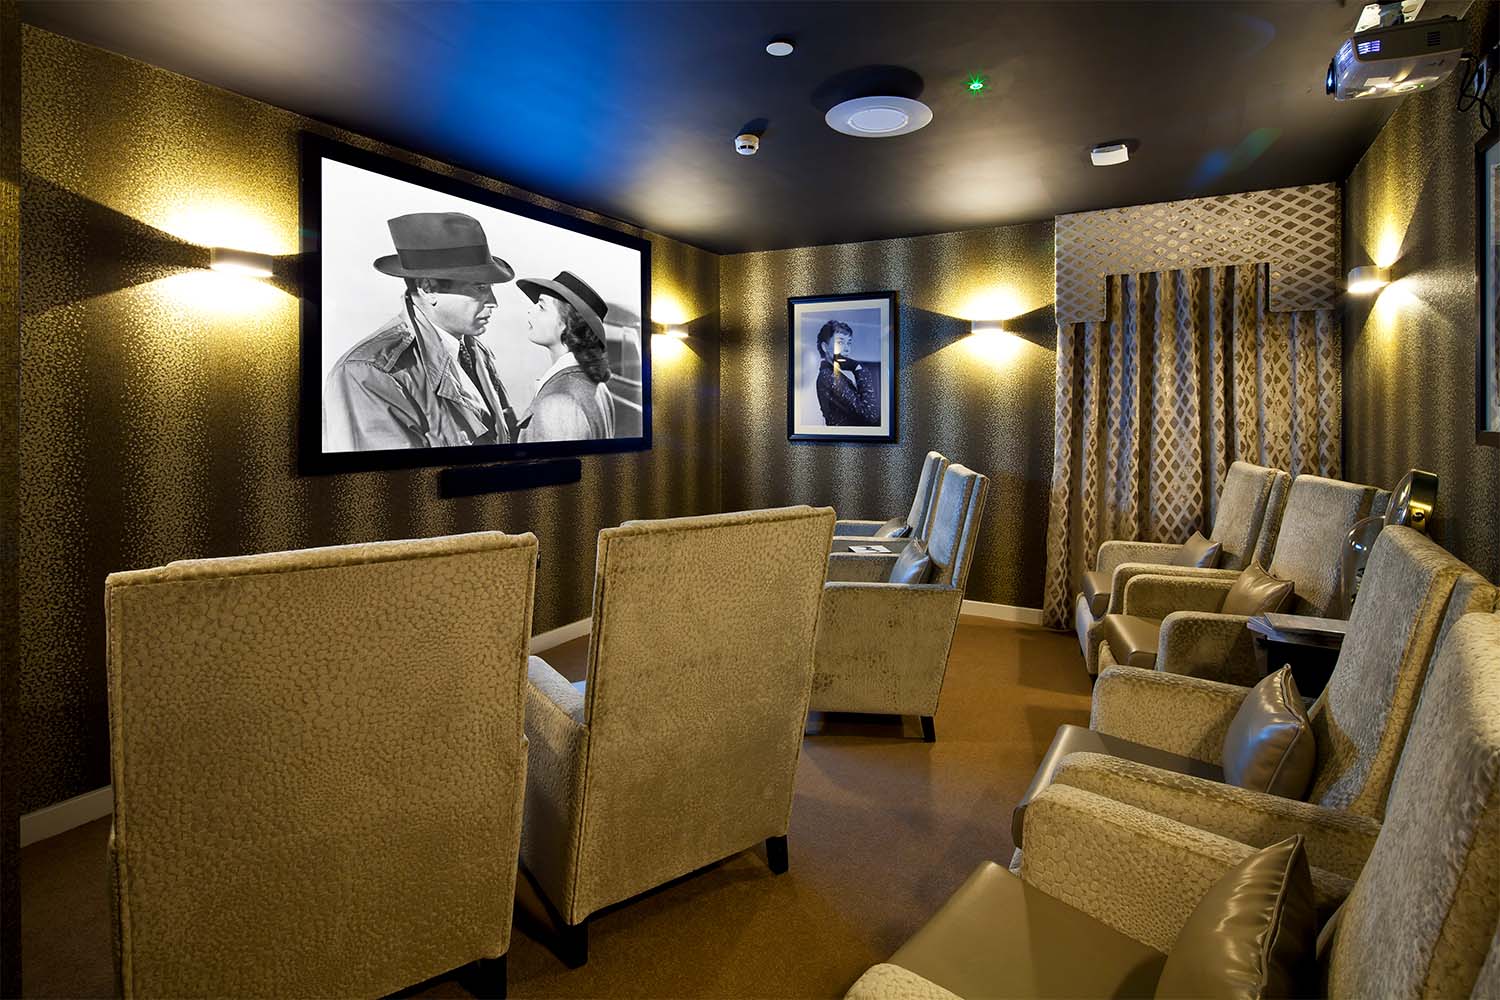 Our cinema room at Ty Llandaff Care Home